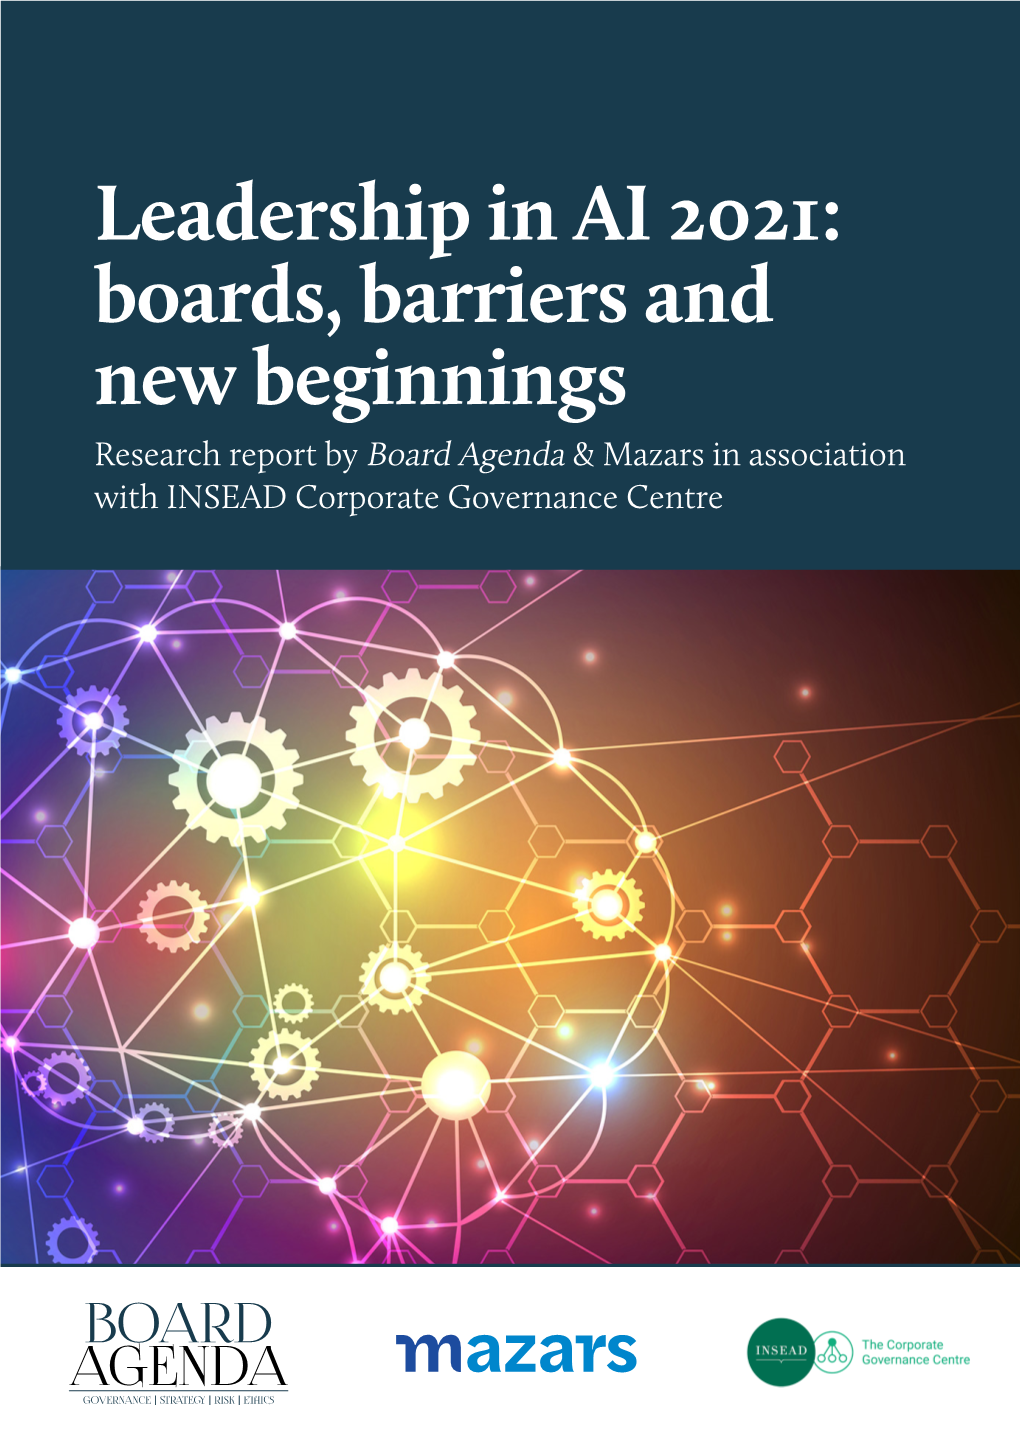 Leadership in AI 2021: Boards, Barriers and New Beginnings Research Report by Board Agenda & Mazars in Association with INSEAD Corporate Governance Centre